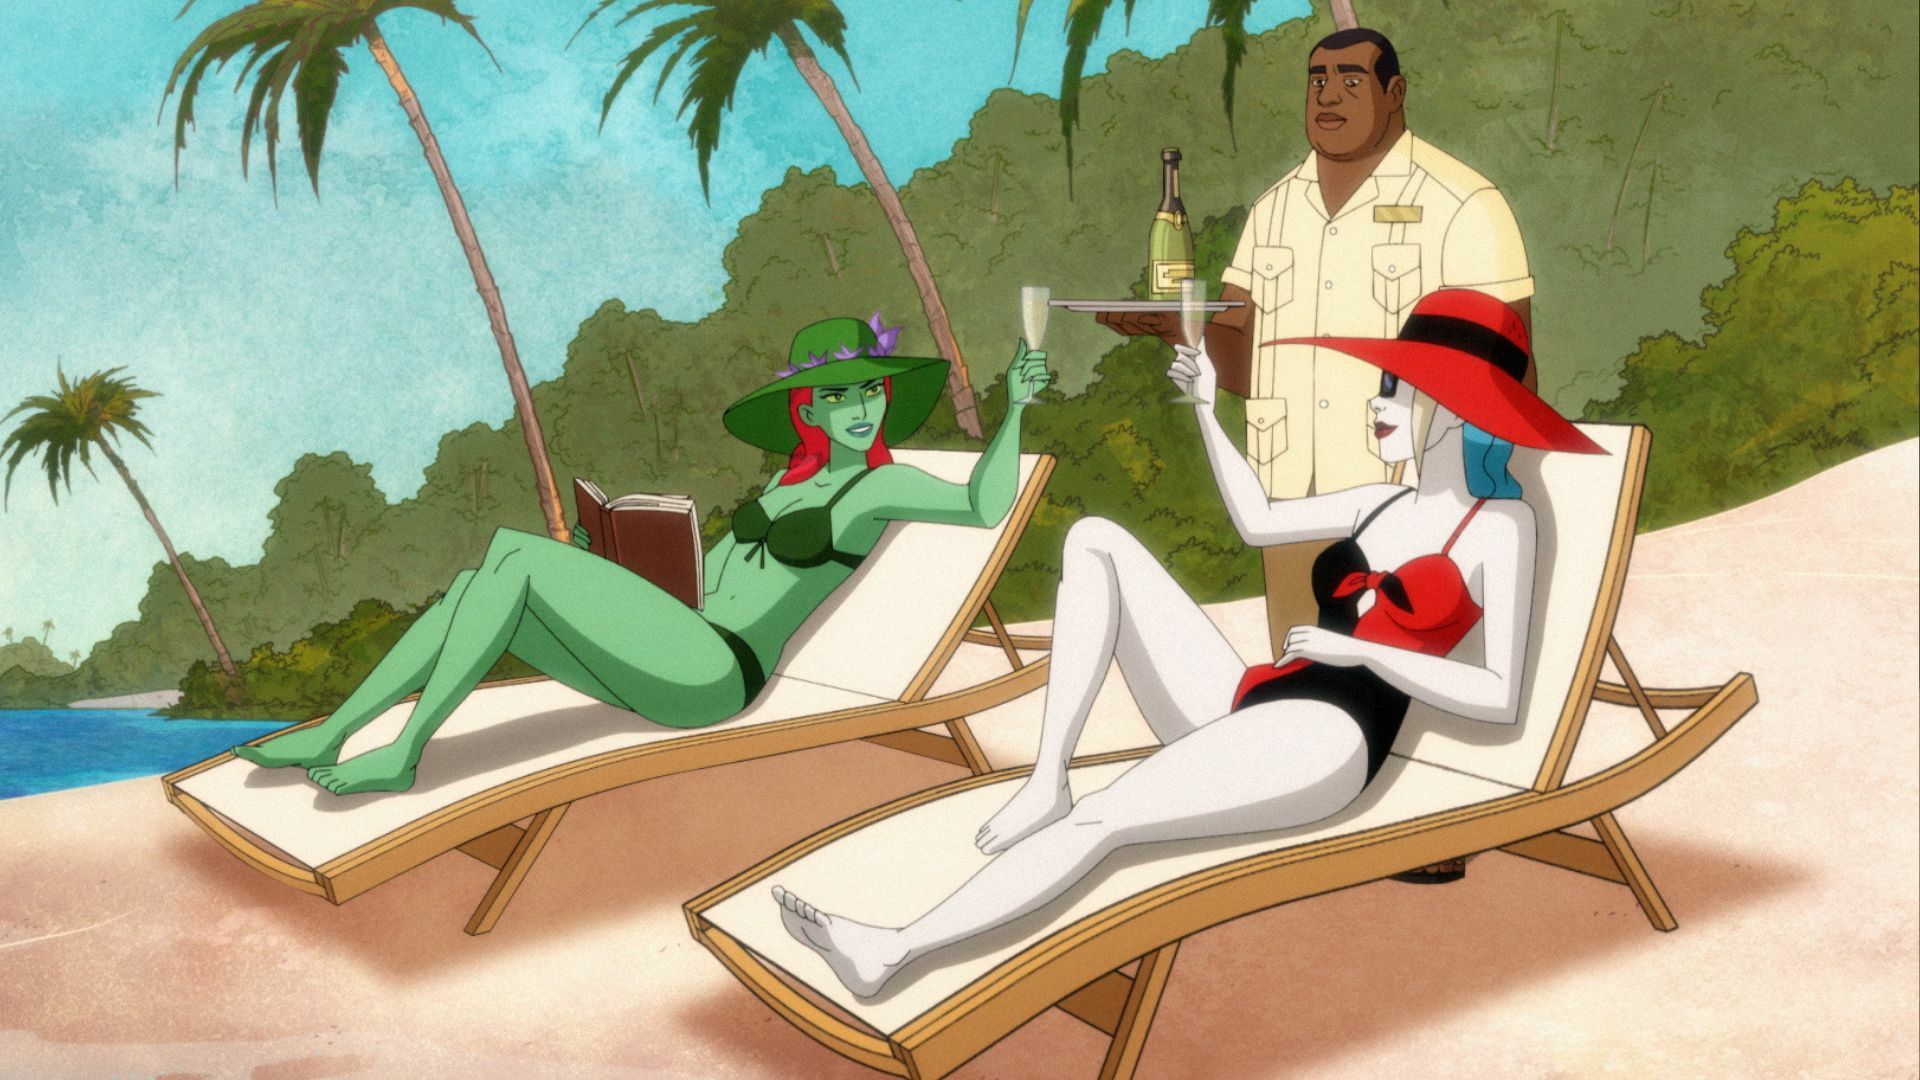 Poison Ivy and Harley Quinn relax on a beach. 